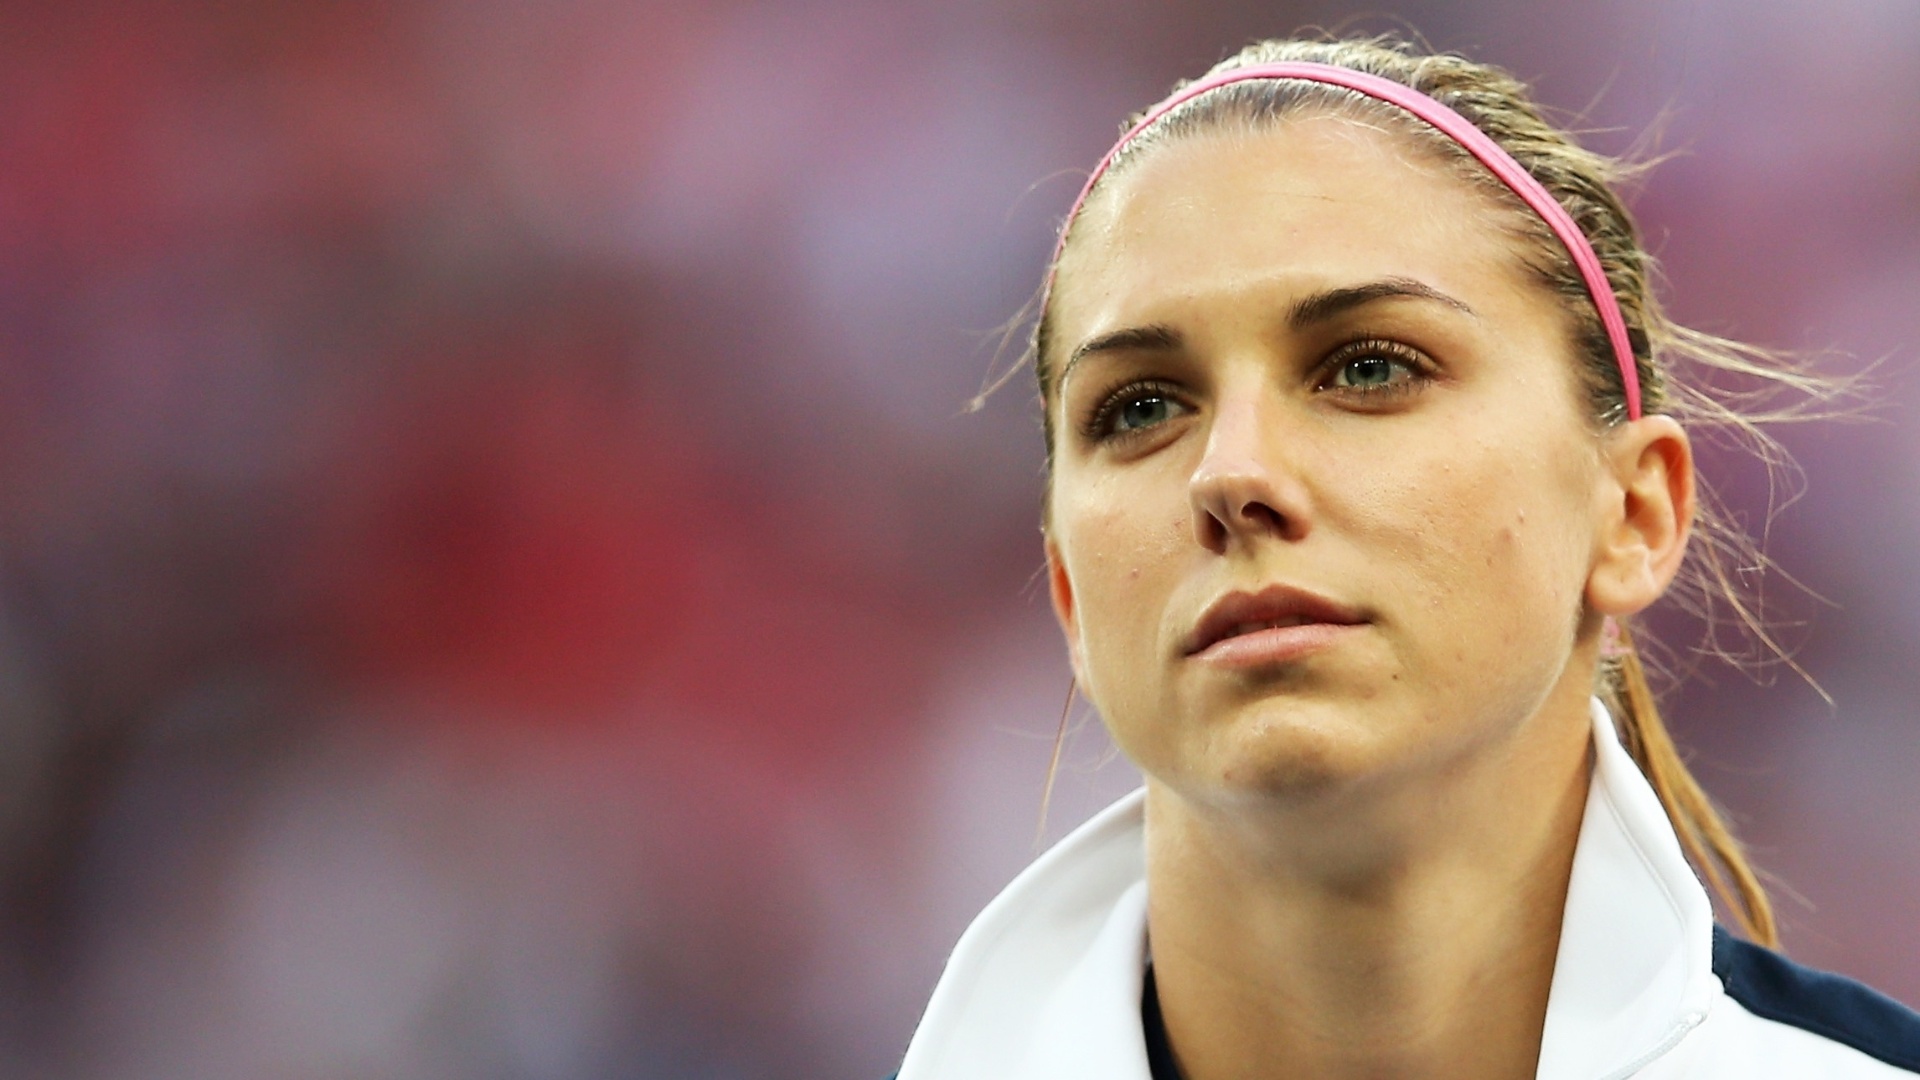 Alex Morgan Wallpapers Images Photos Pictures Backgrounds